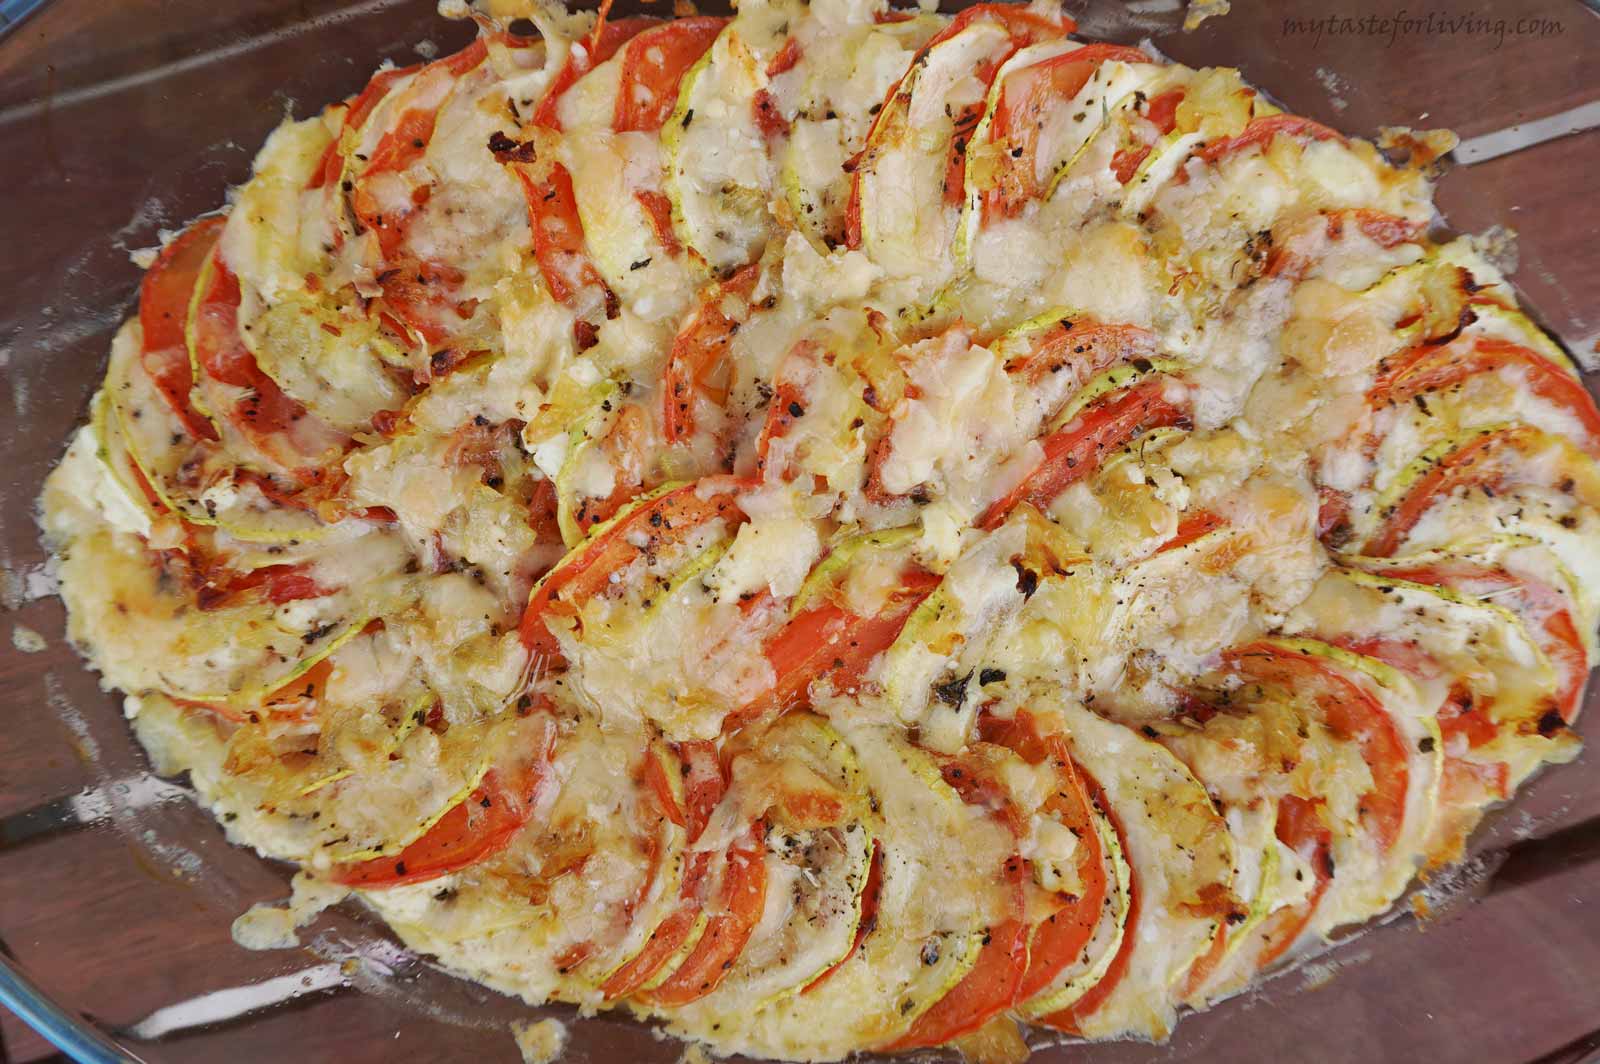 Favorite summer dish! The combination of zucchini and tomatoes is great, and their taste is complemented by adding cheese and cheddar. With the aroma of onion, garlic, basil and parmesan - the dish becomes indescribably delicious.